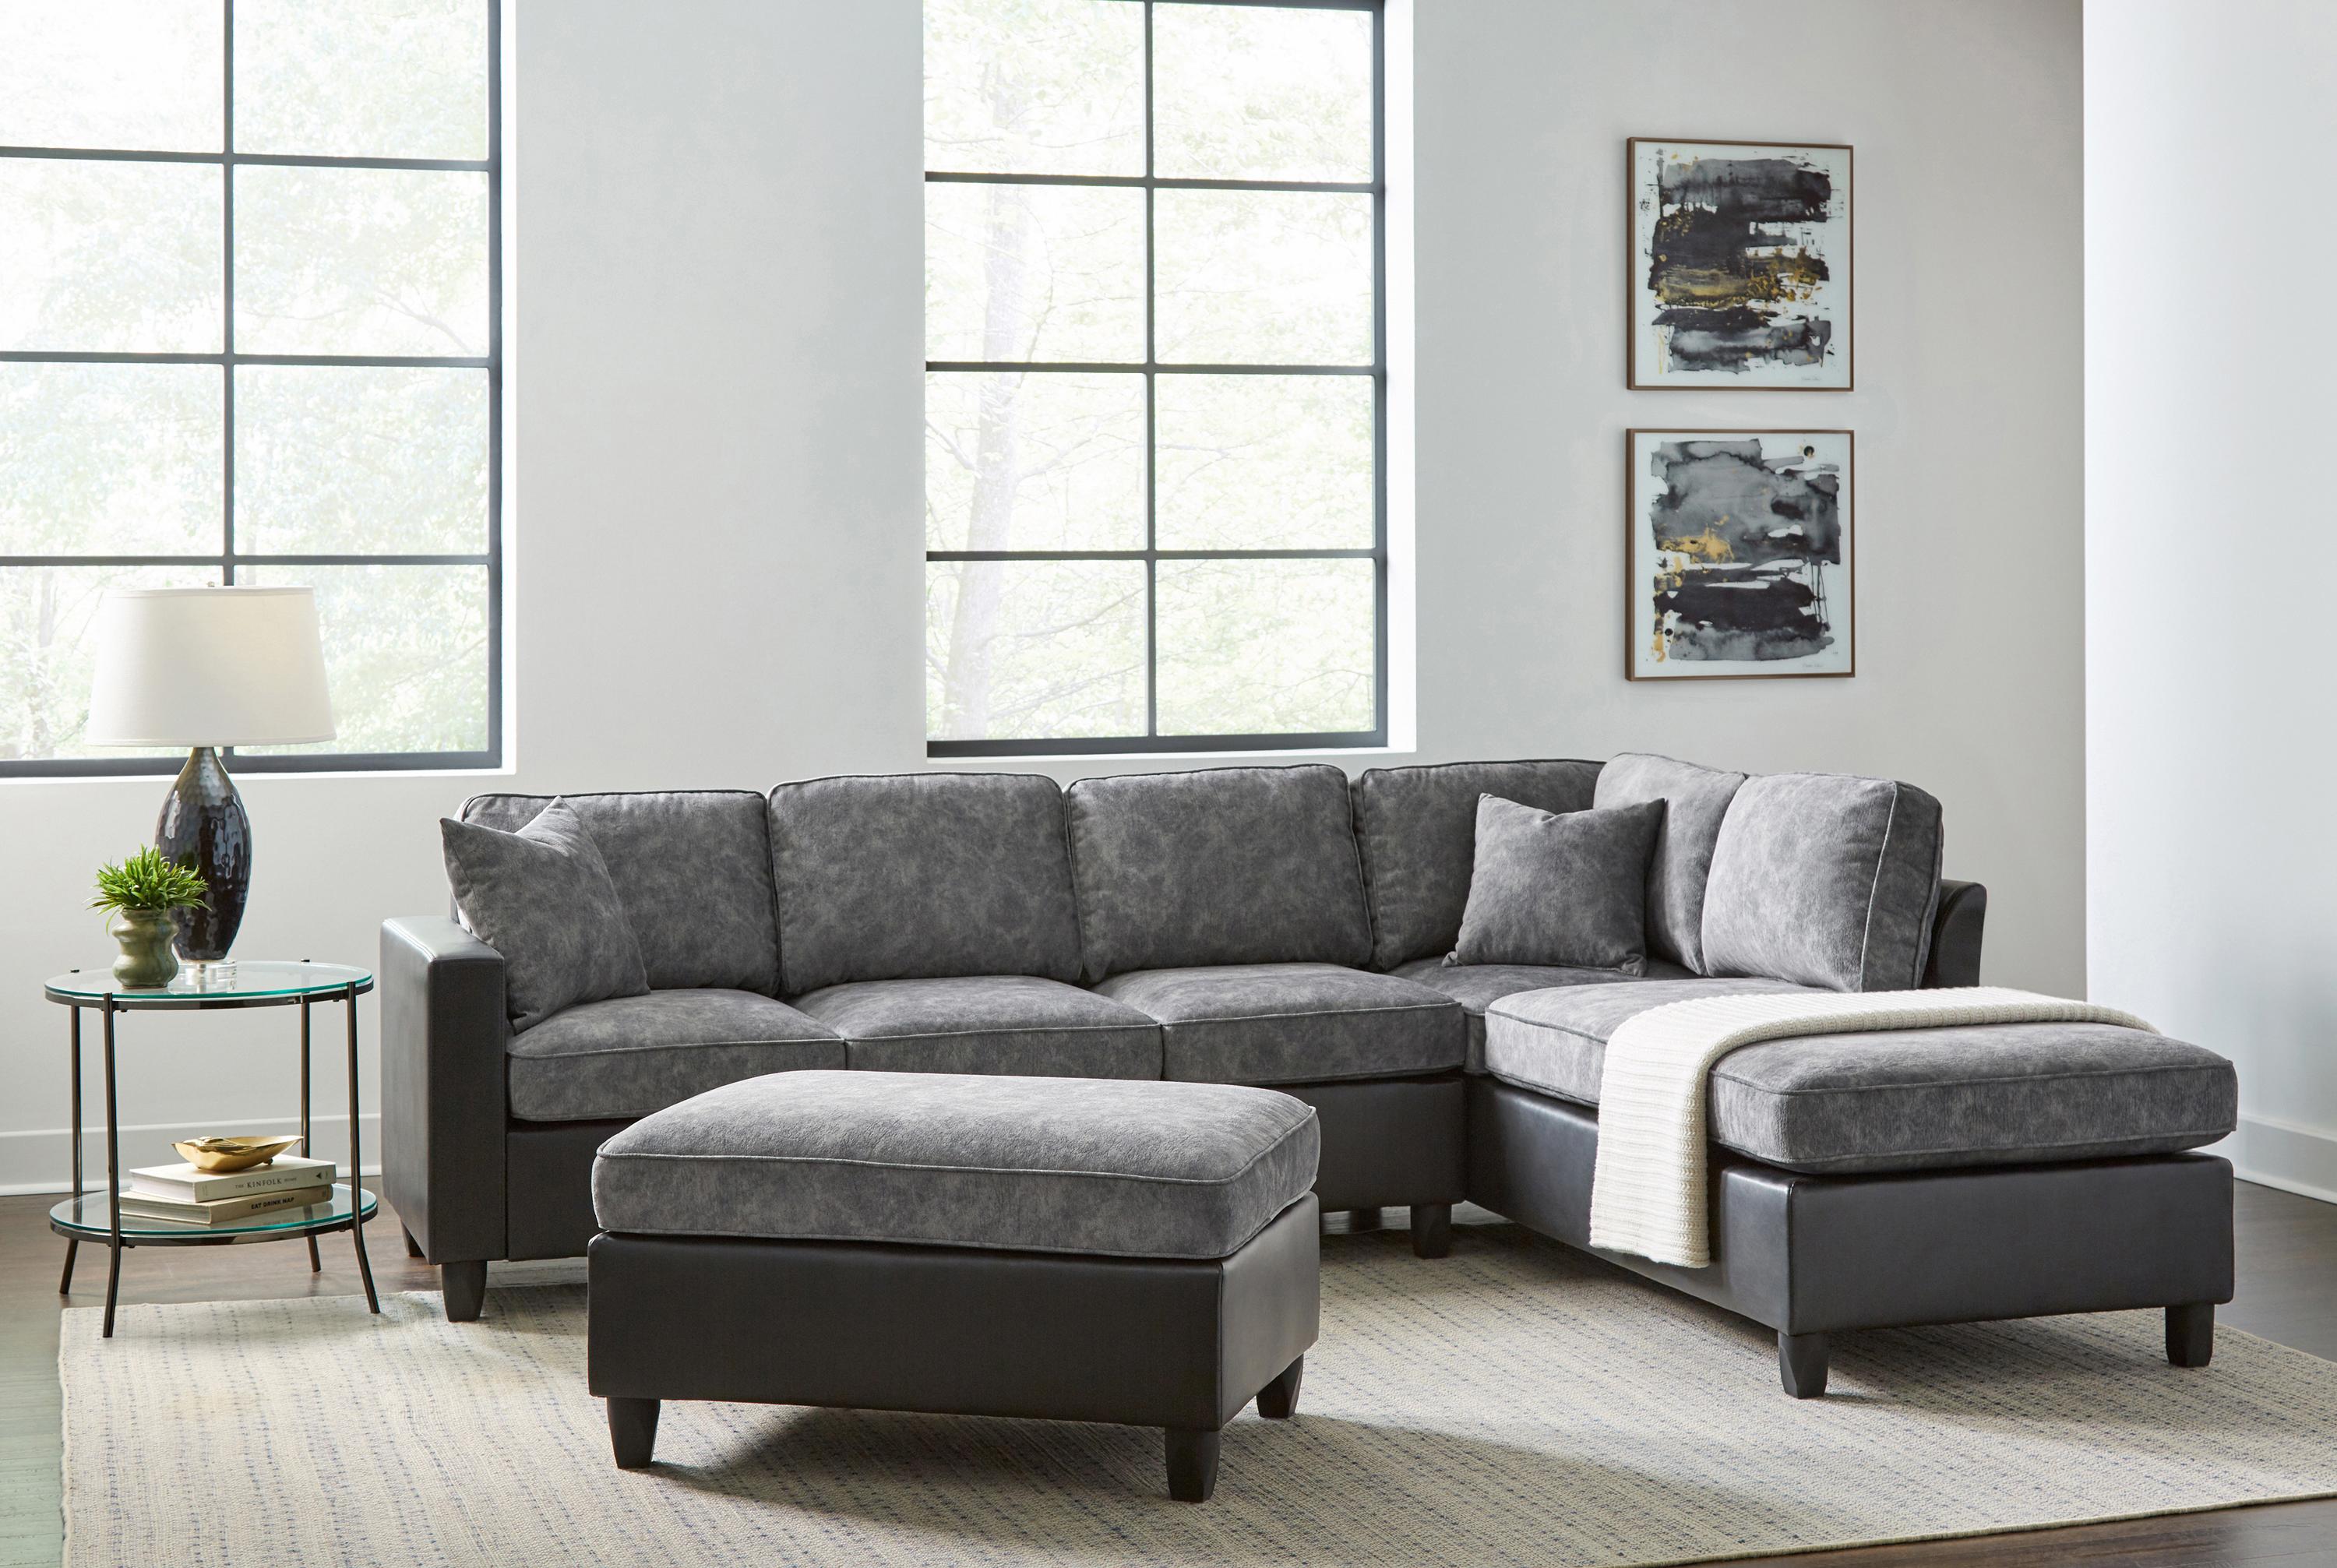 Contemporary Sectional Set 552040-S2 Vinny 552040-S2 in Pewter Leatherette